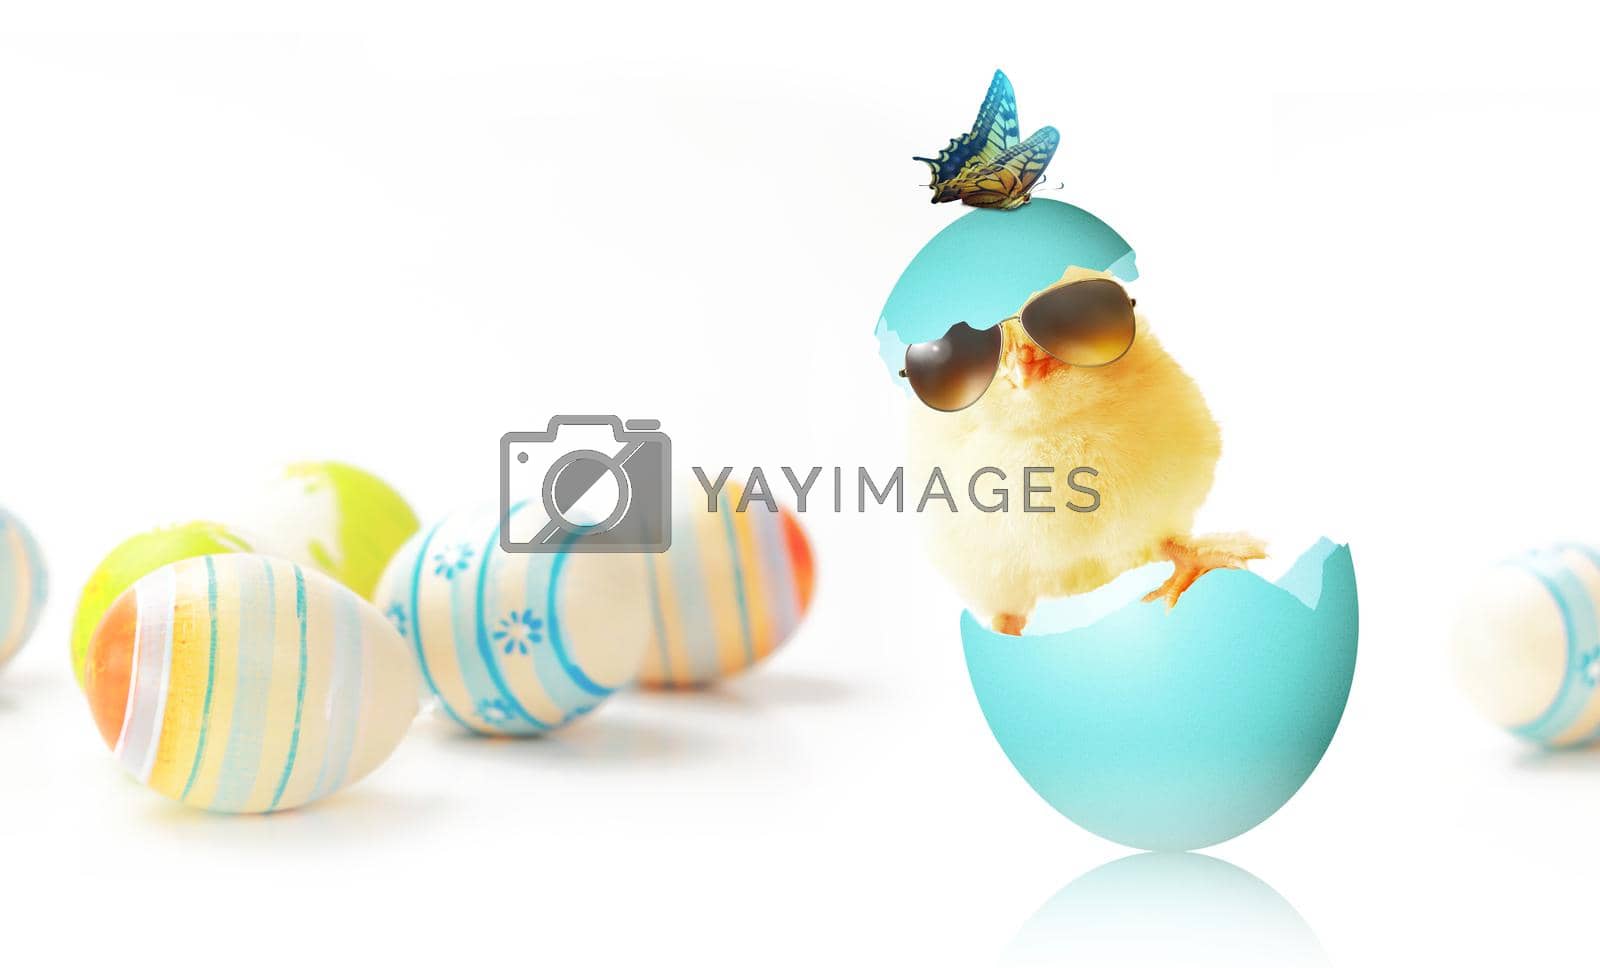 Royalty free image of Funny cute baby chick with sunglasses and egg. by Taut